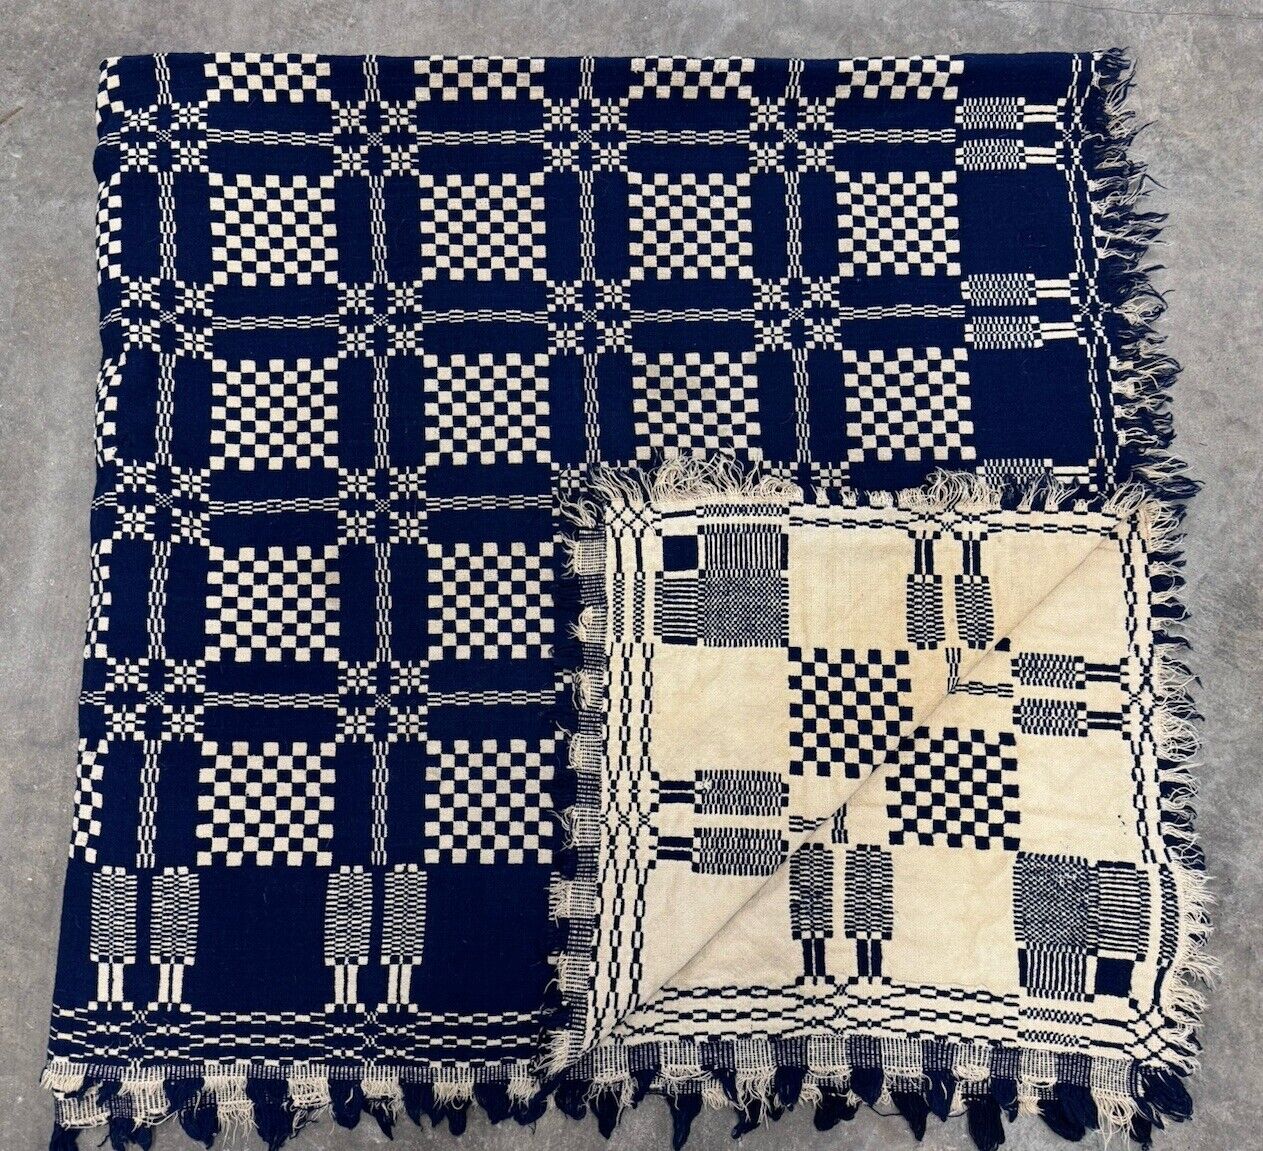 Antique Mid-1800s Jacquard Coverlet Blanket Hand Loomed Indigo Blue Wool 2 Sided